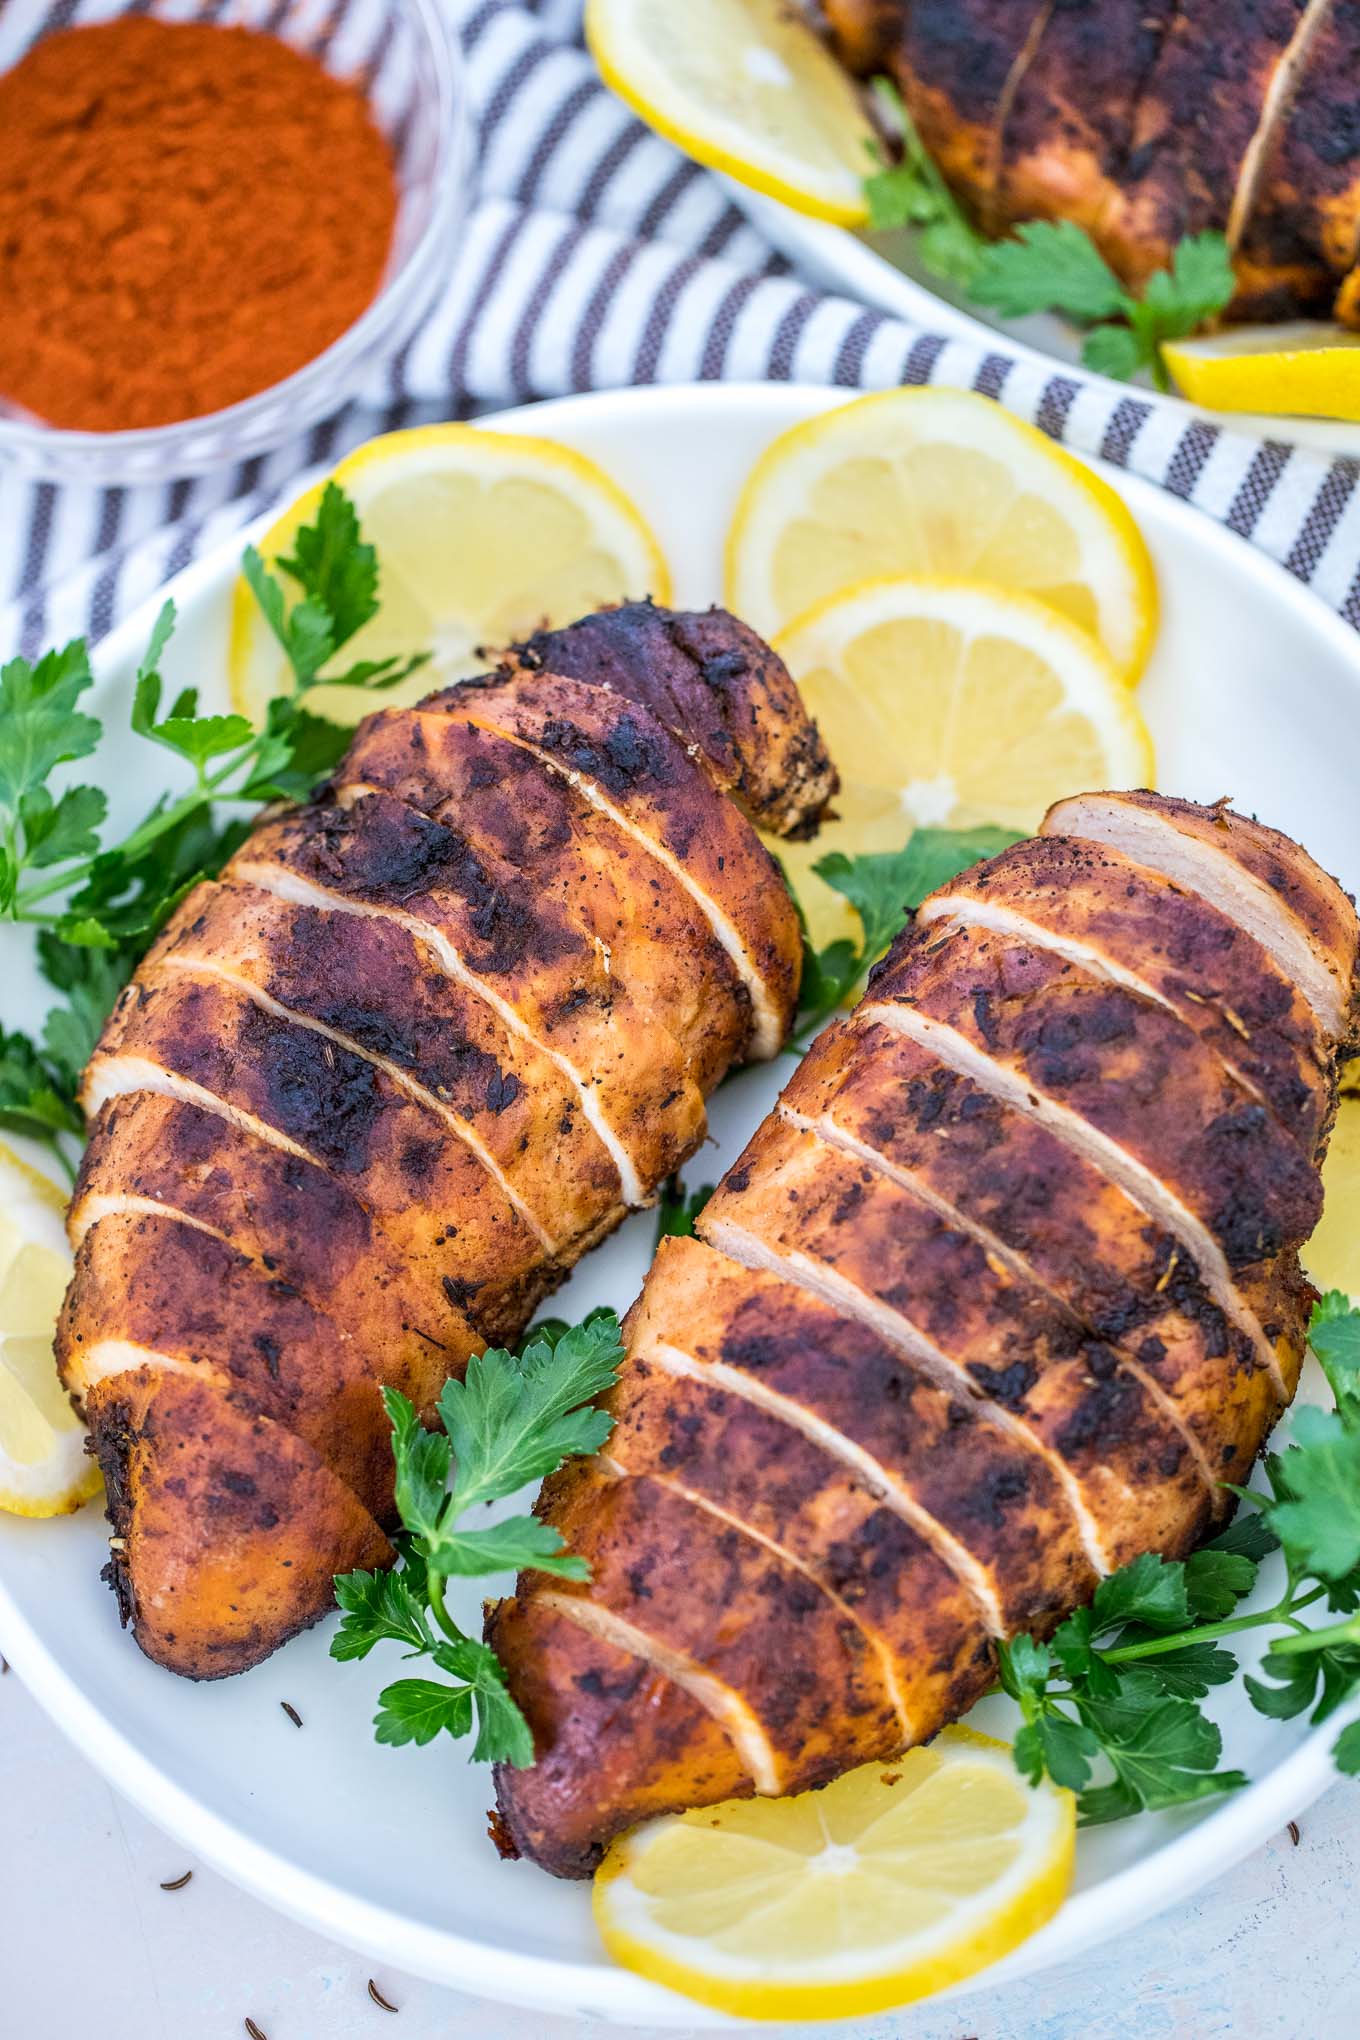 Keto Blackened Chicken [video] - Sweet and Savory Meals